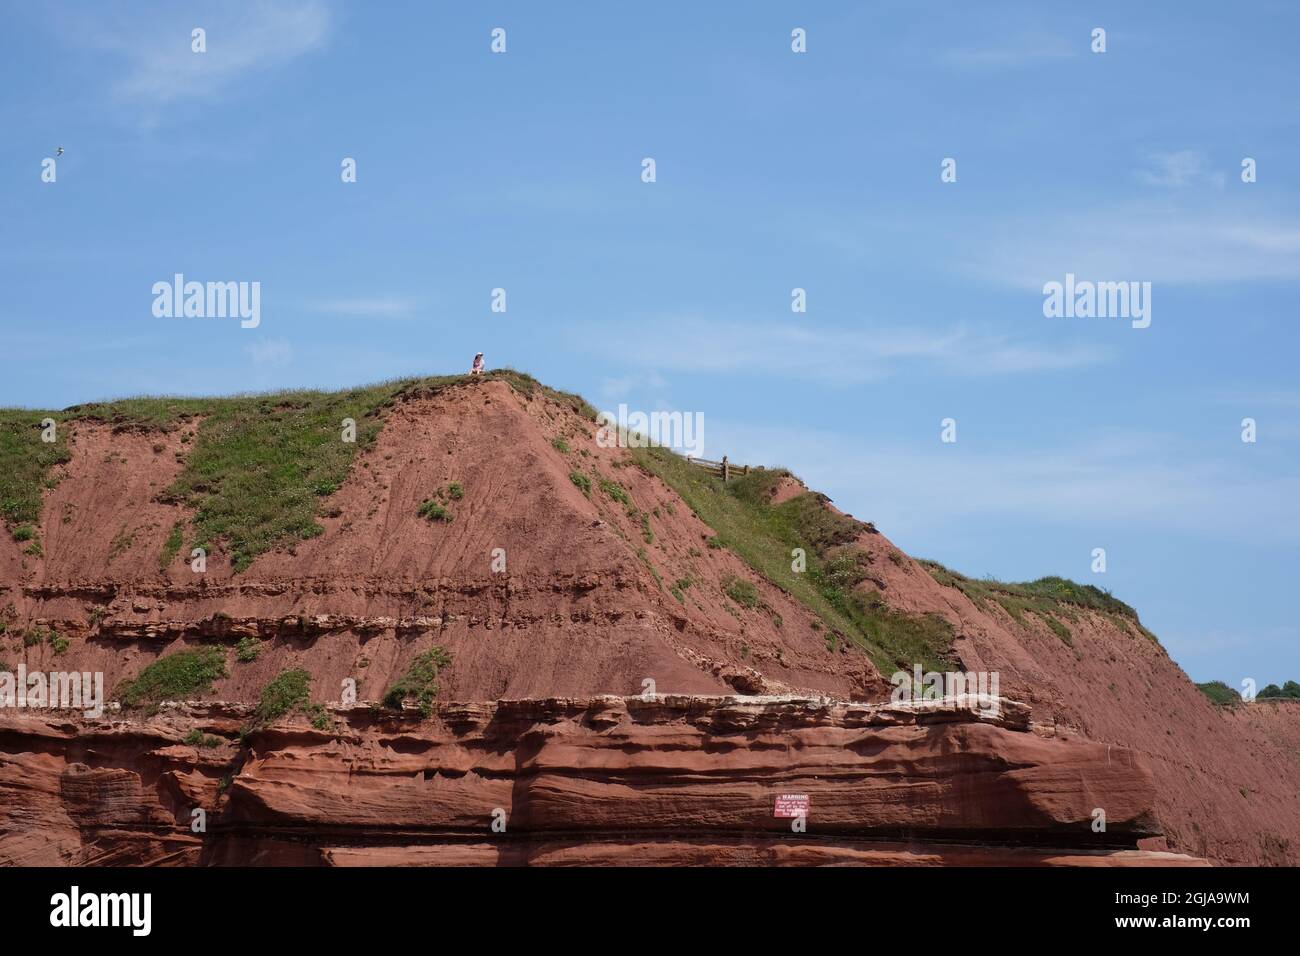 A woman sits at the edge of the unstable red sandstone cliffs of Orcombe Point. A warning sign is visible on the cliff face below. Exmouth, Devon. Stock Photo